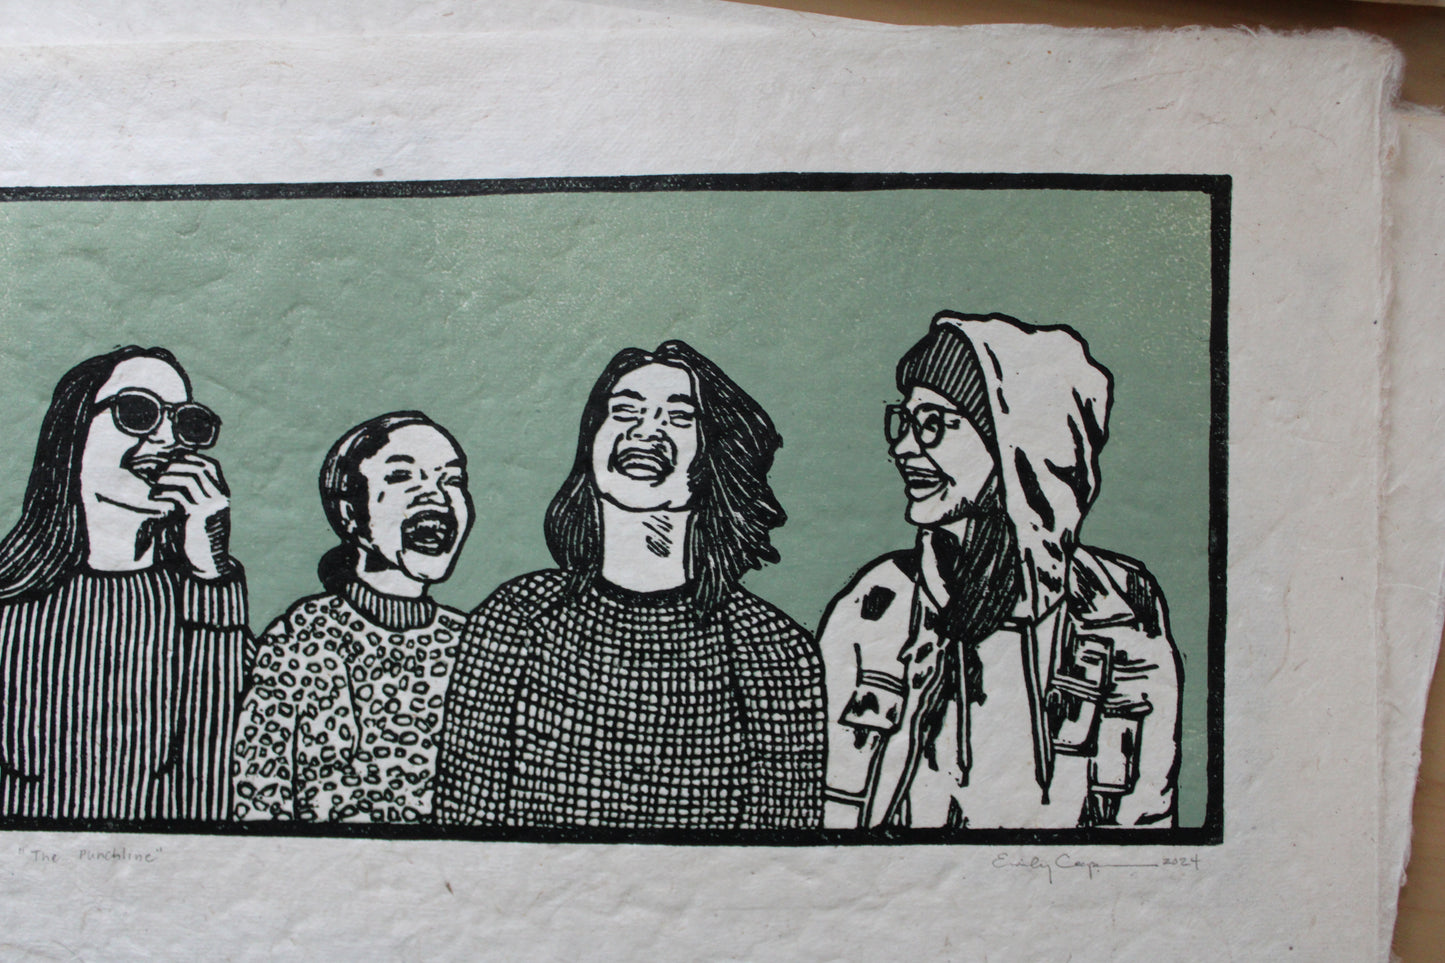 "The Punchline" Original Limited Edition Reduction Linoleum Block Print - Two Variations